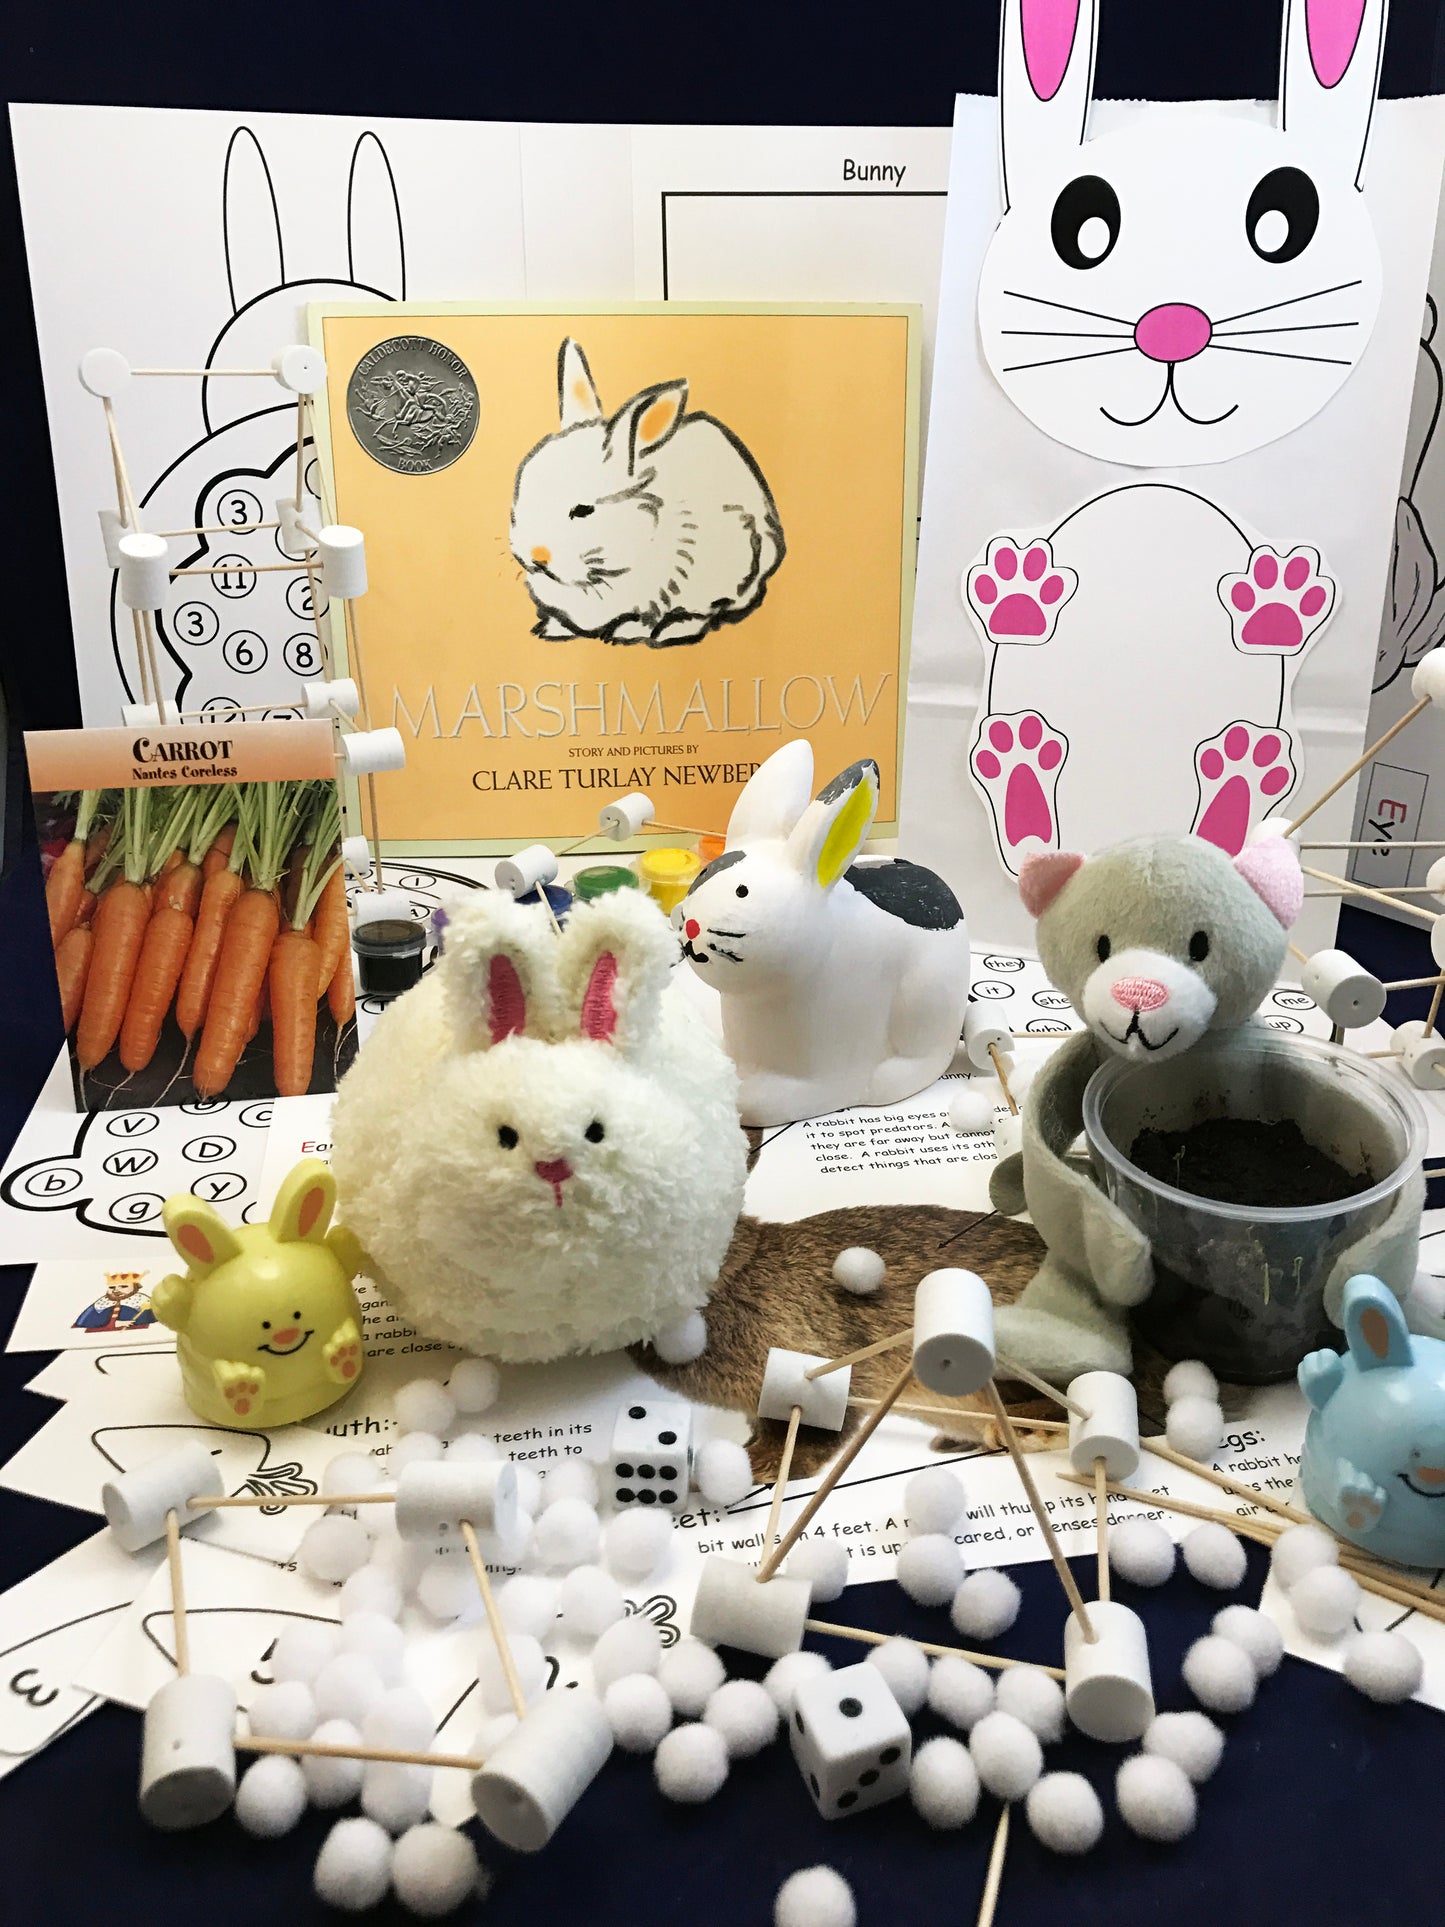 Bunny and Cat Games - Subscription box for children STEAM activities inspired by Marshmallow Bunny by Clare Turlay Newberry